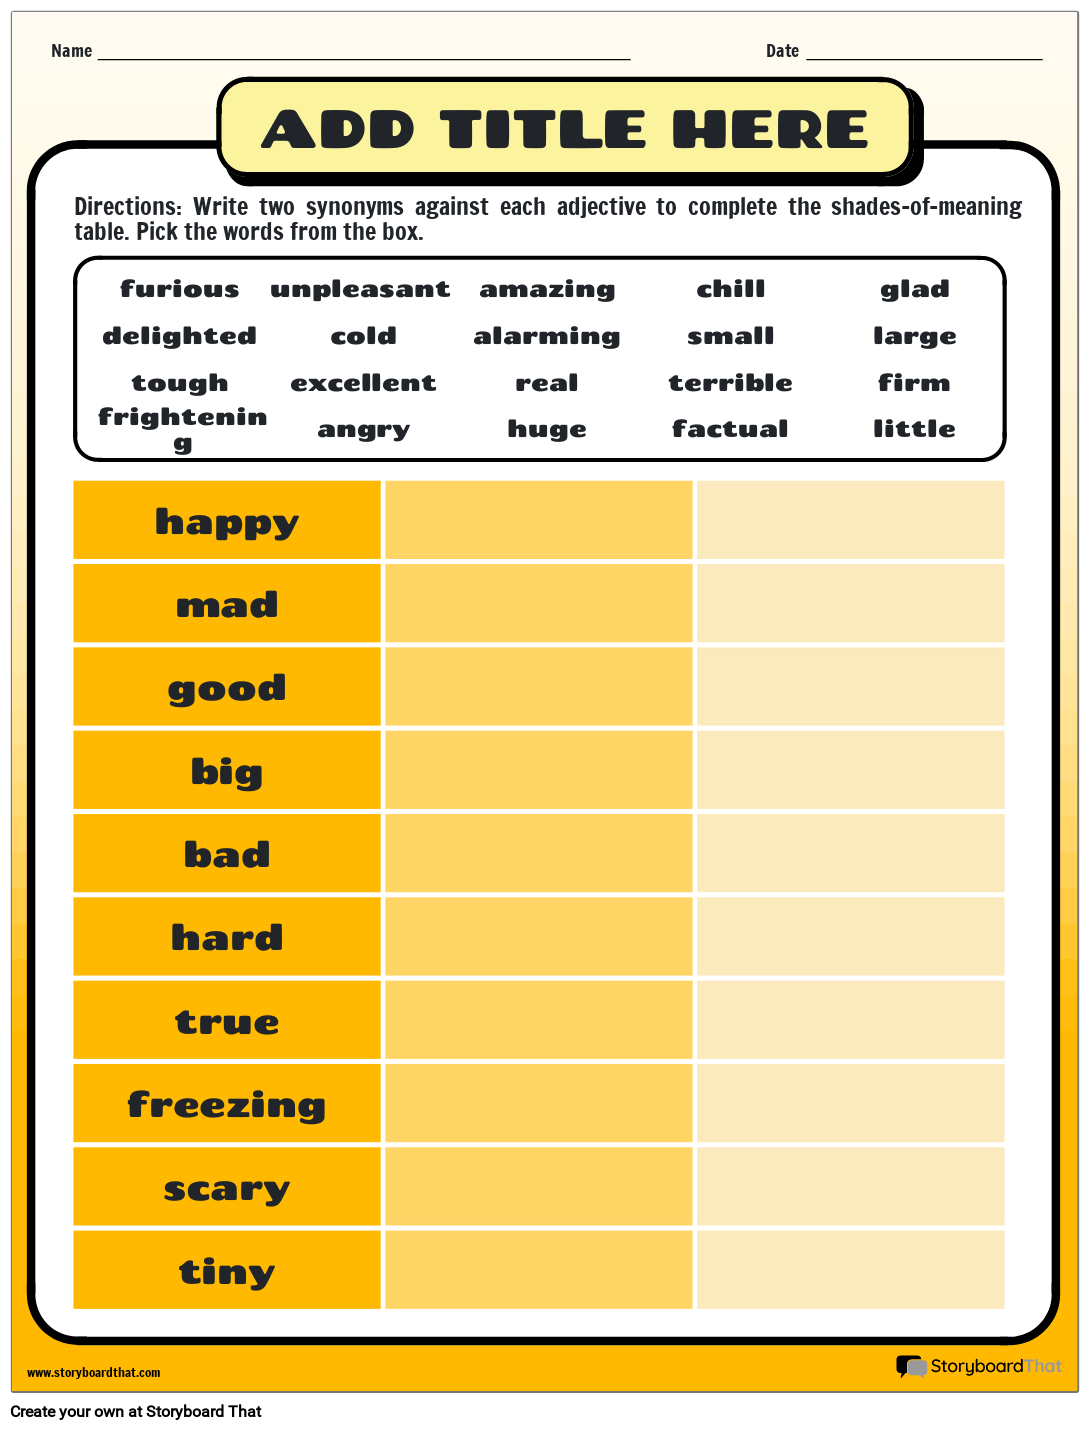 Related Words with Similar Meaning Practice